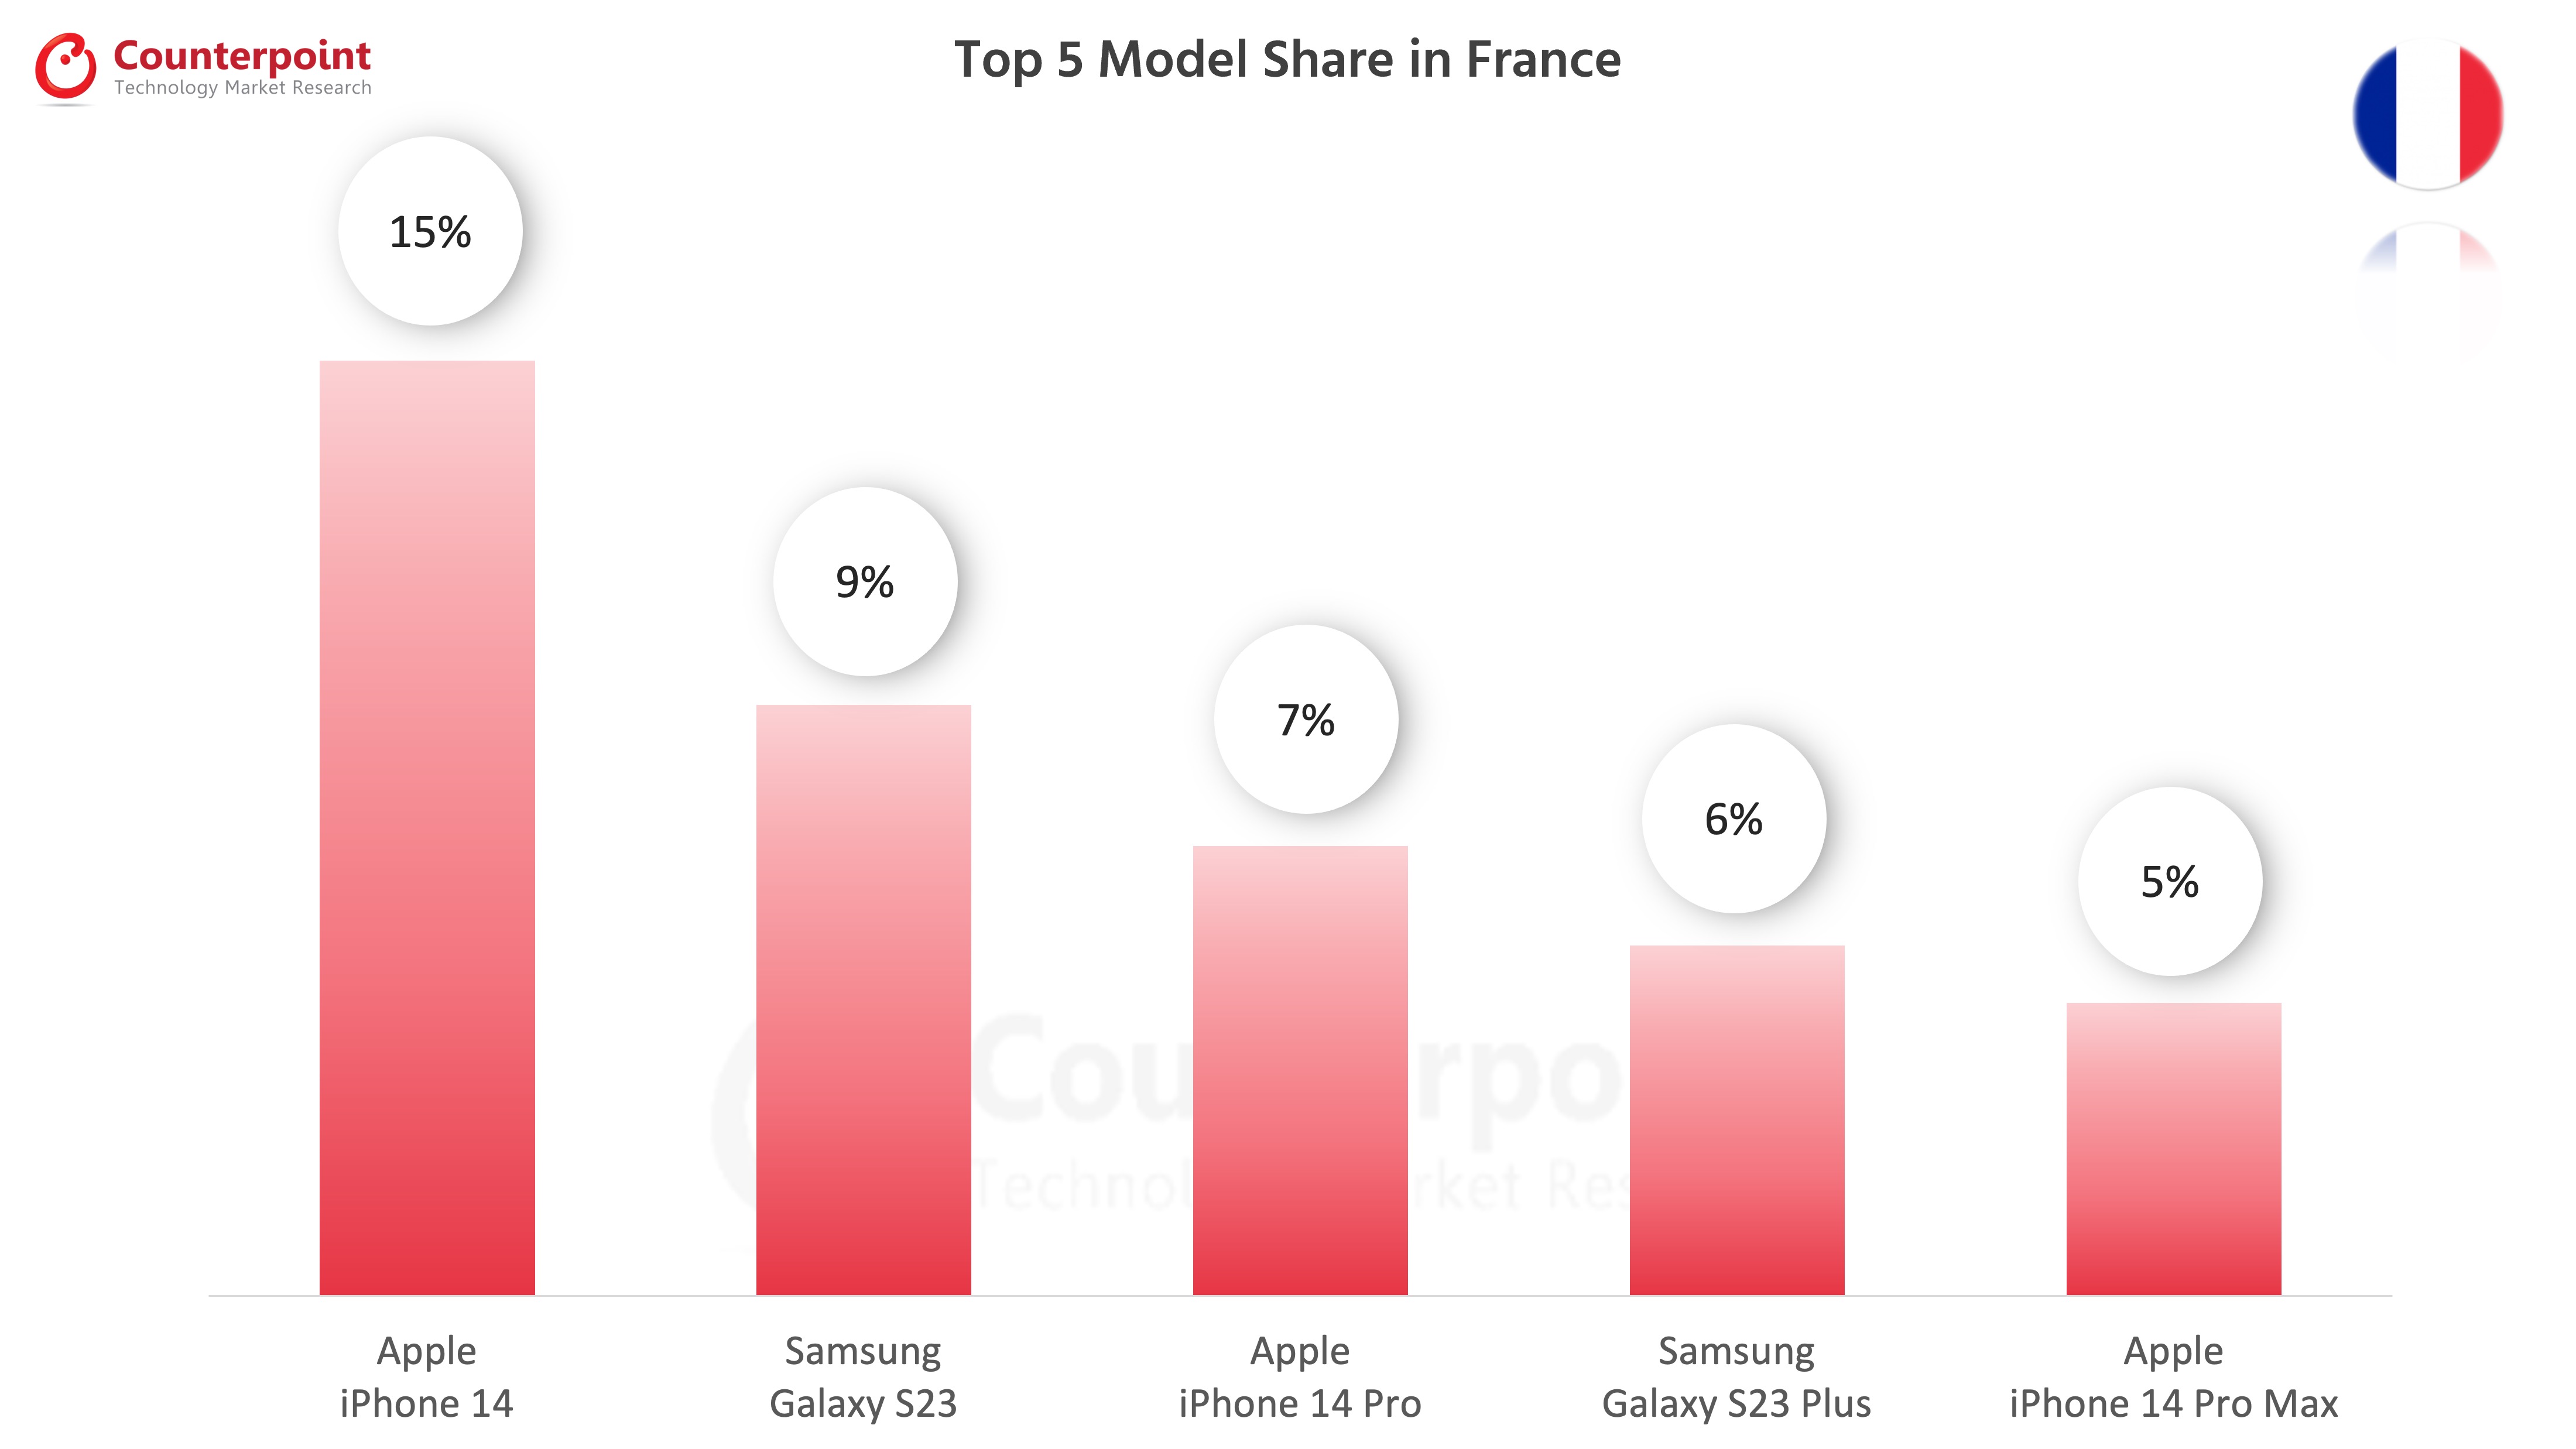 Top 5 Model Share in France